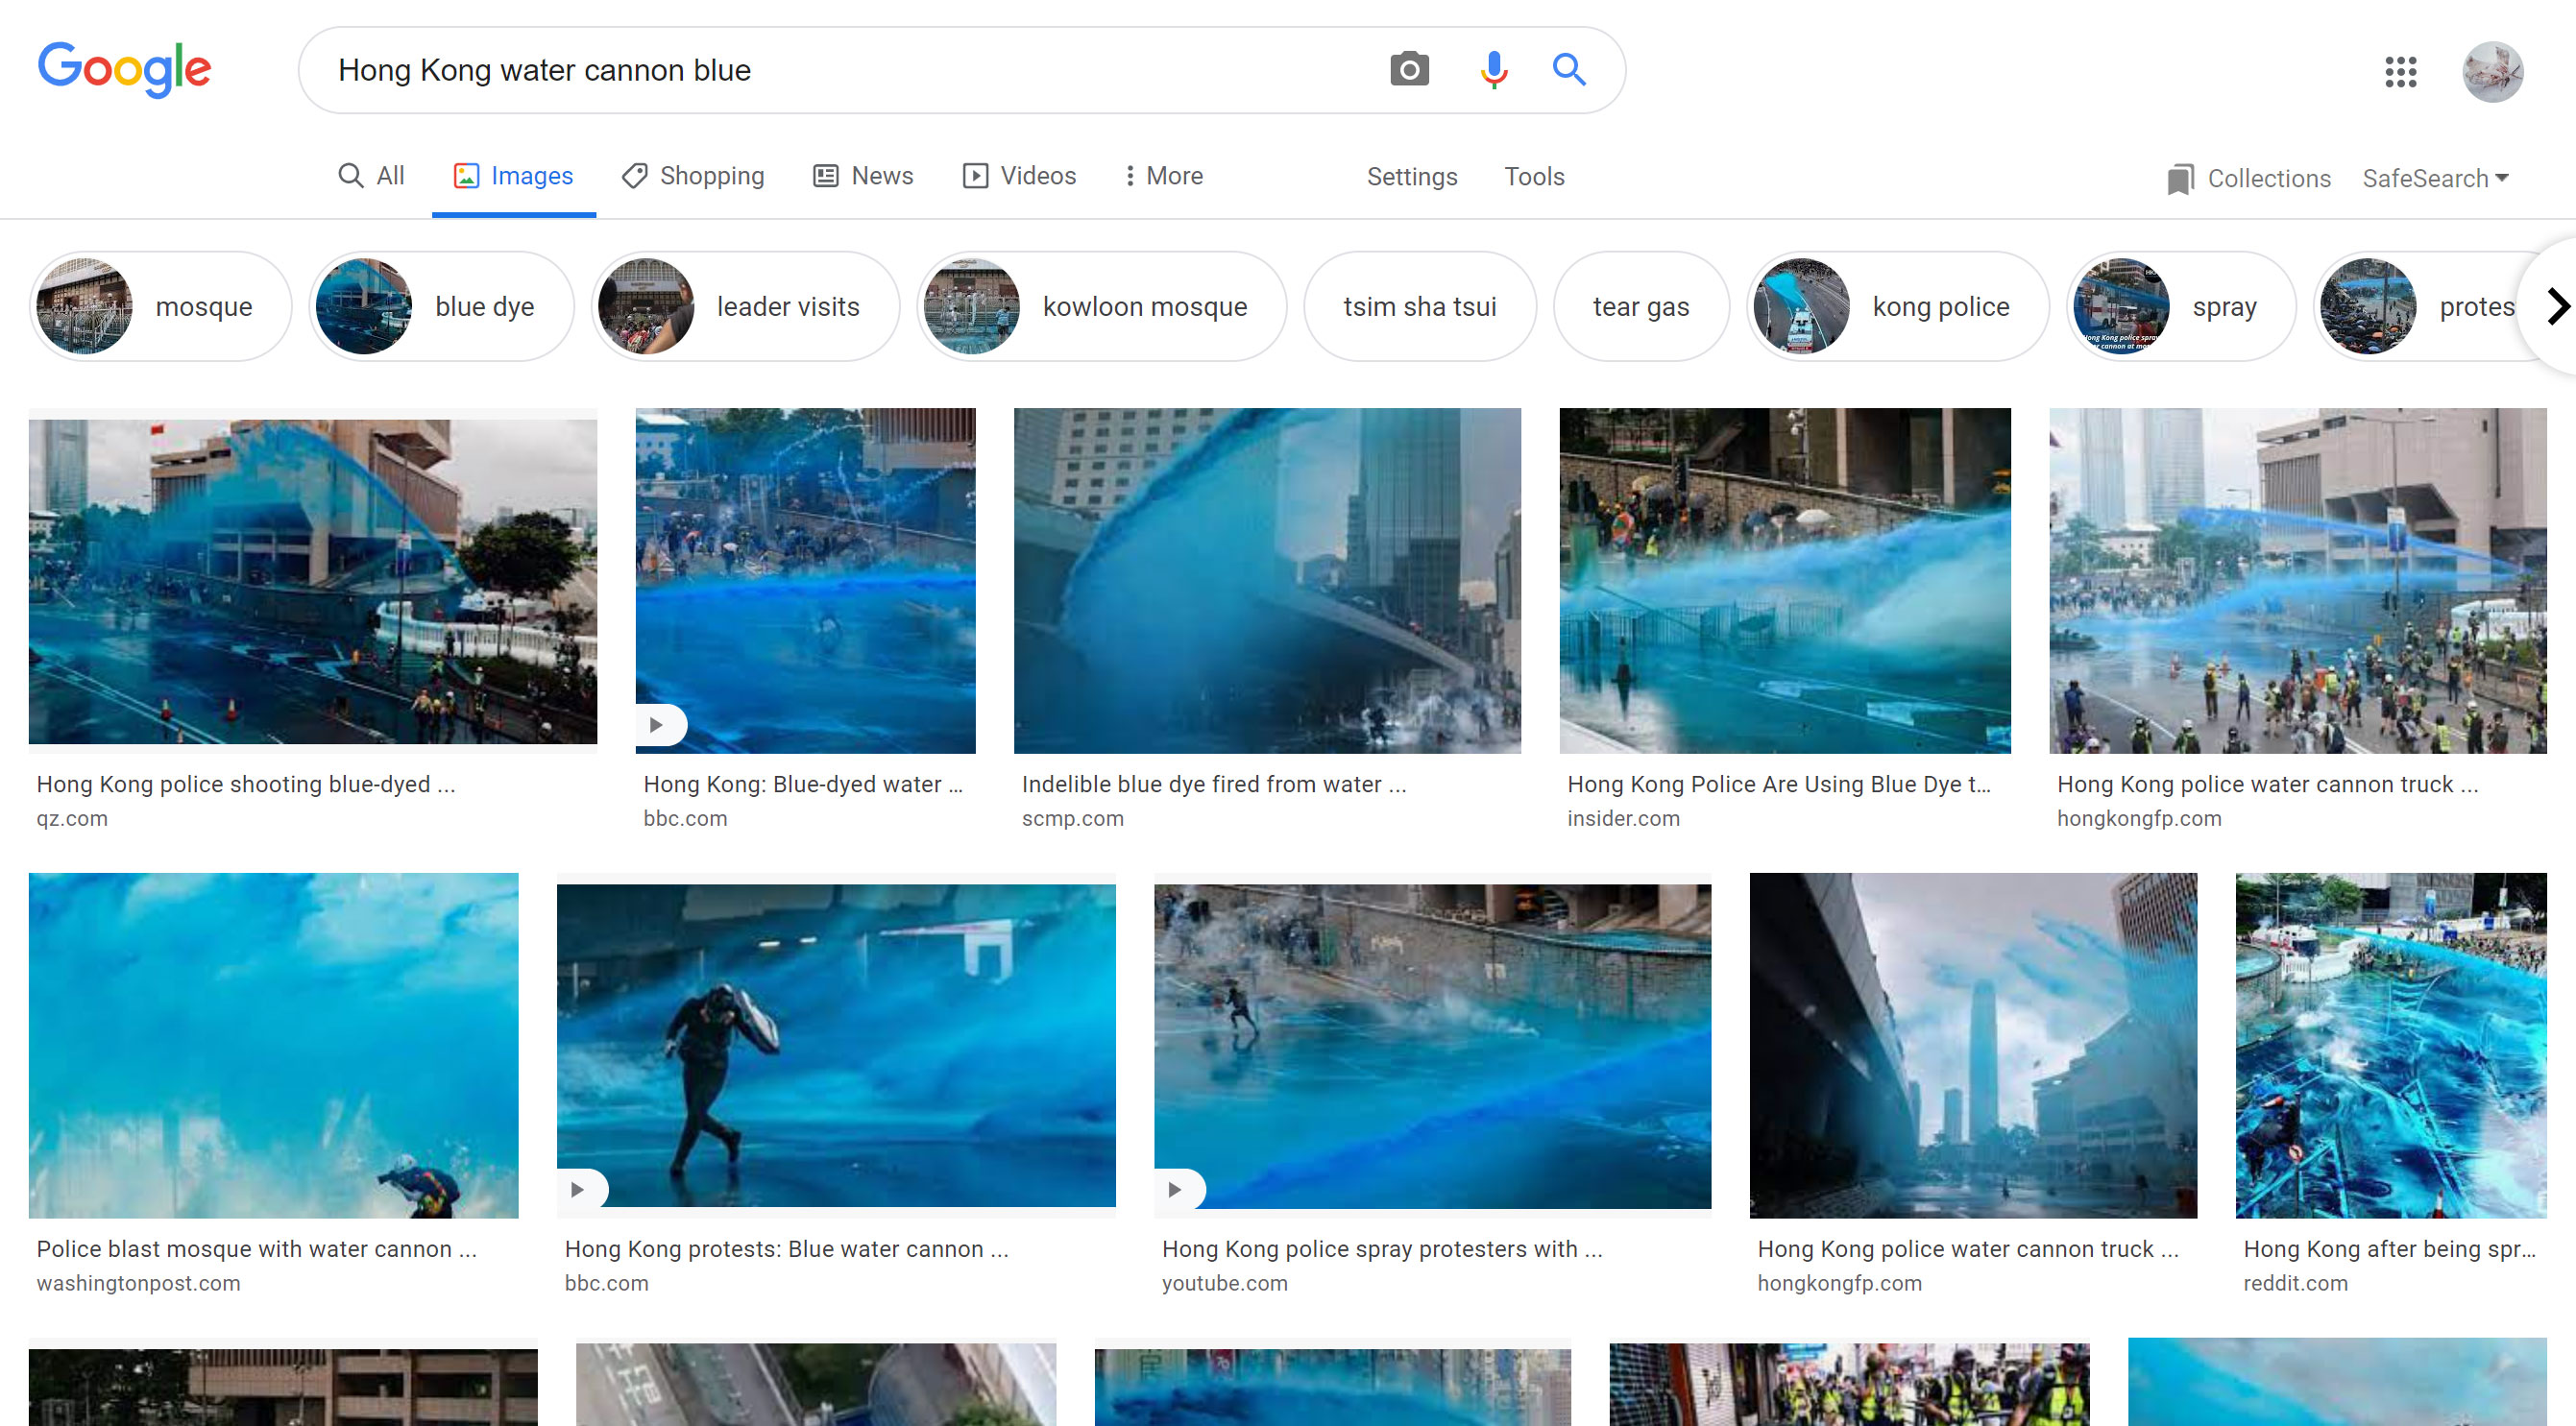 Google image search of “Hong Kong water cannon blue”